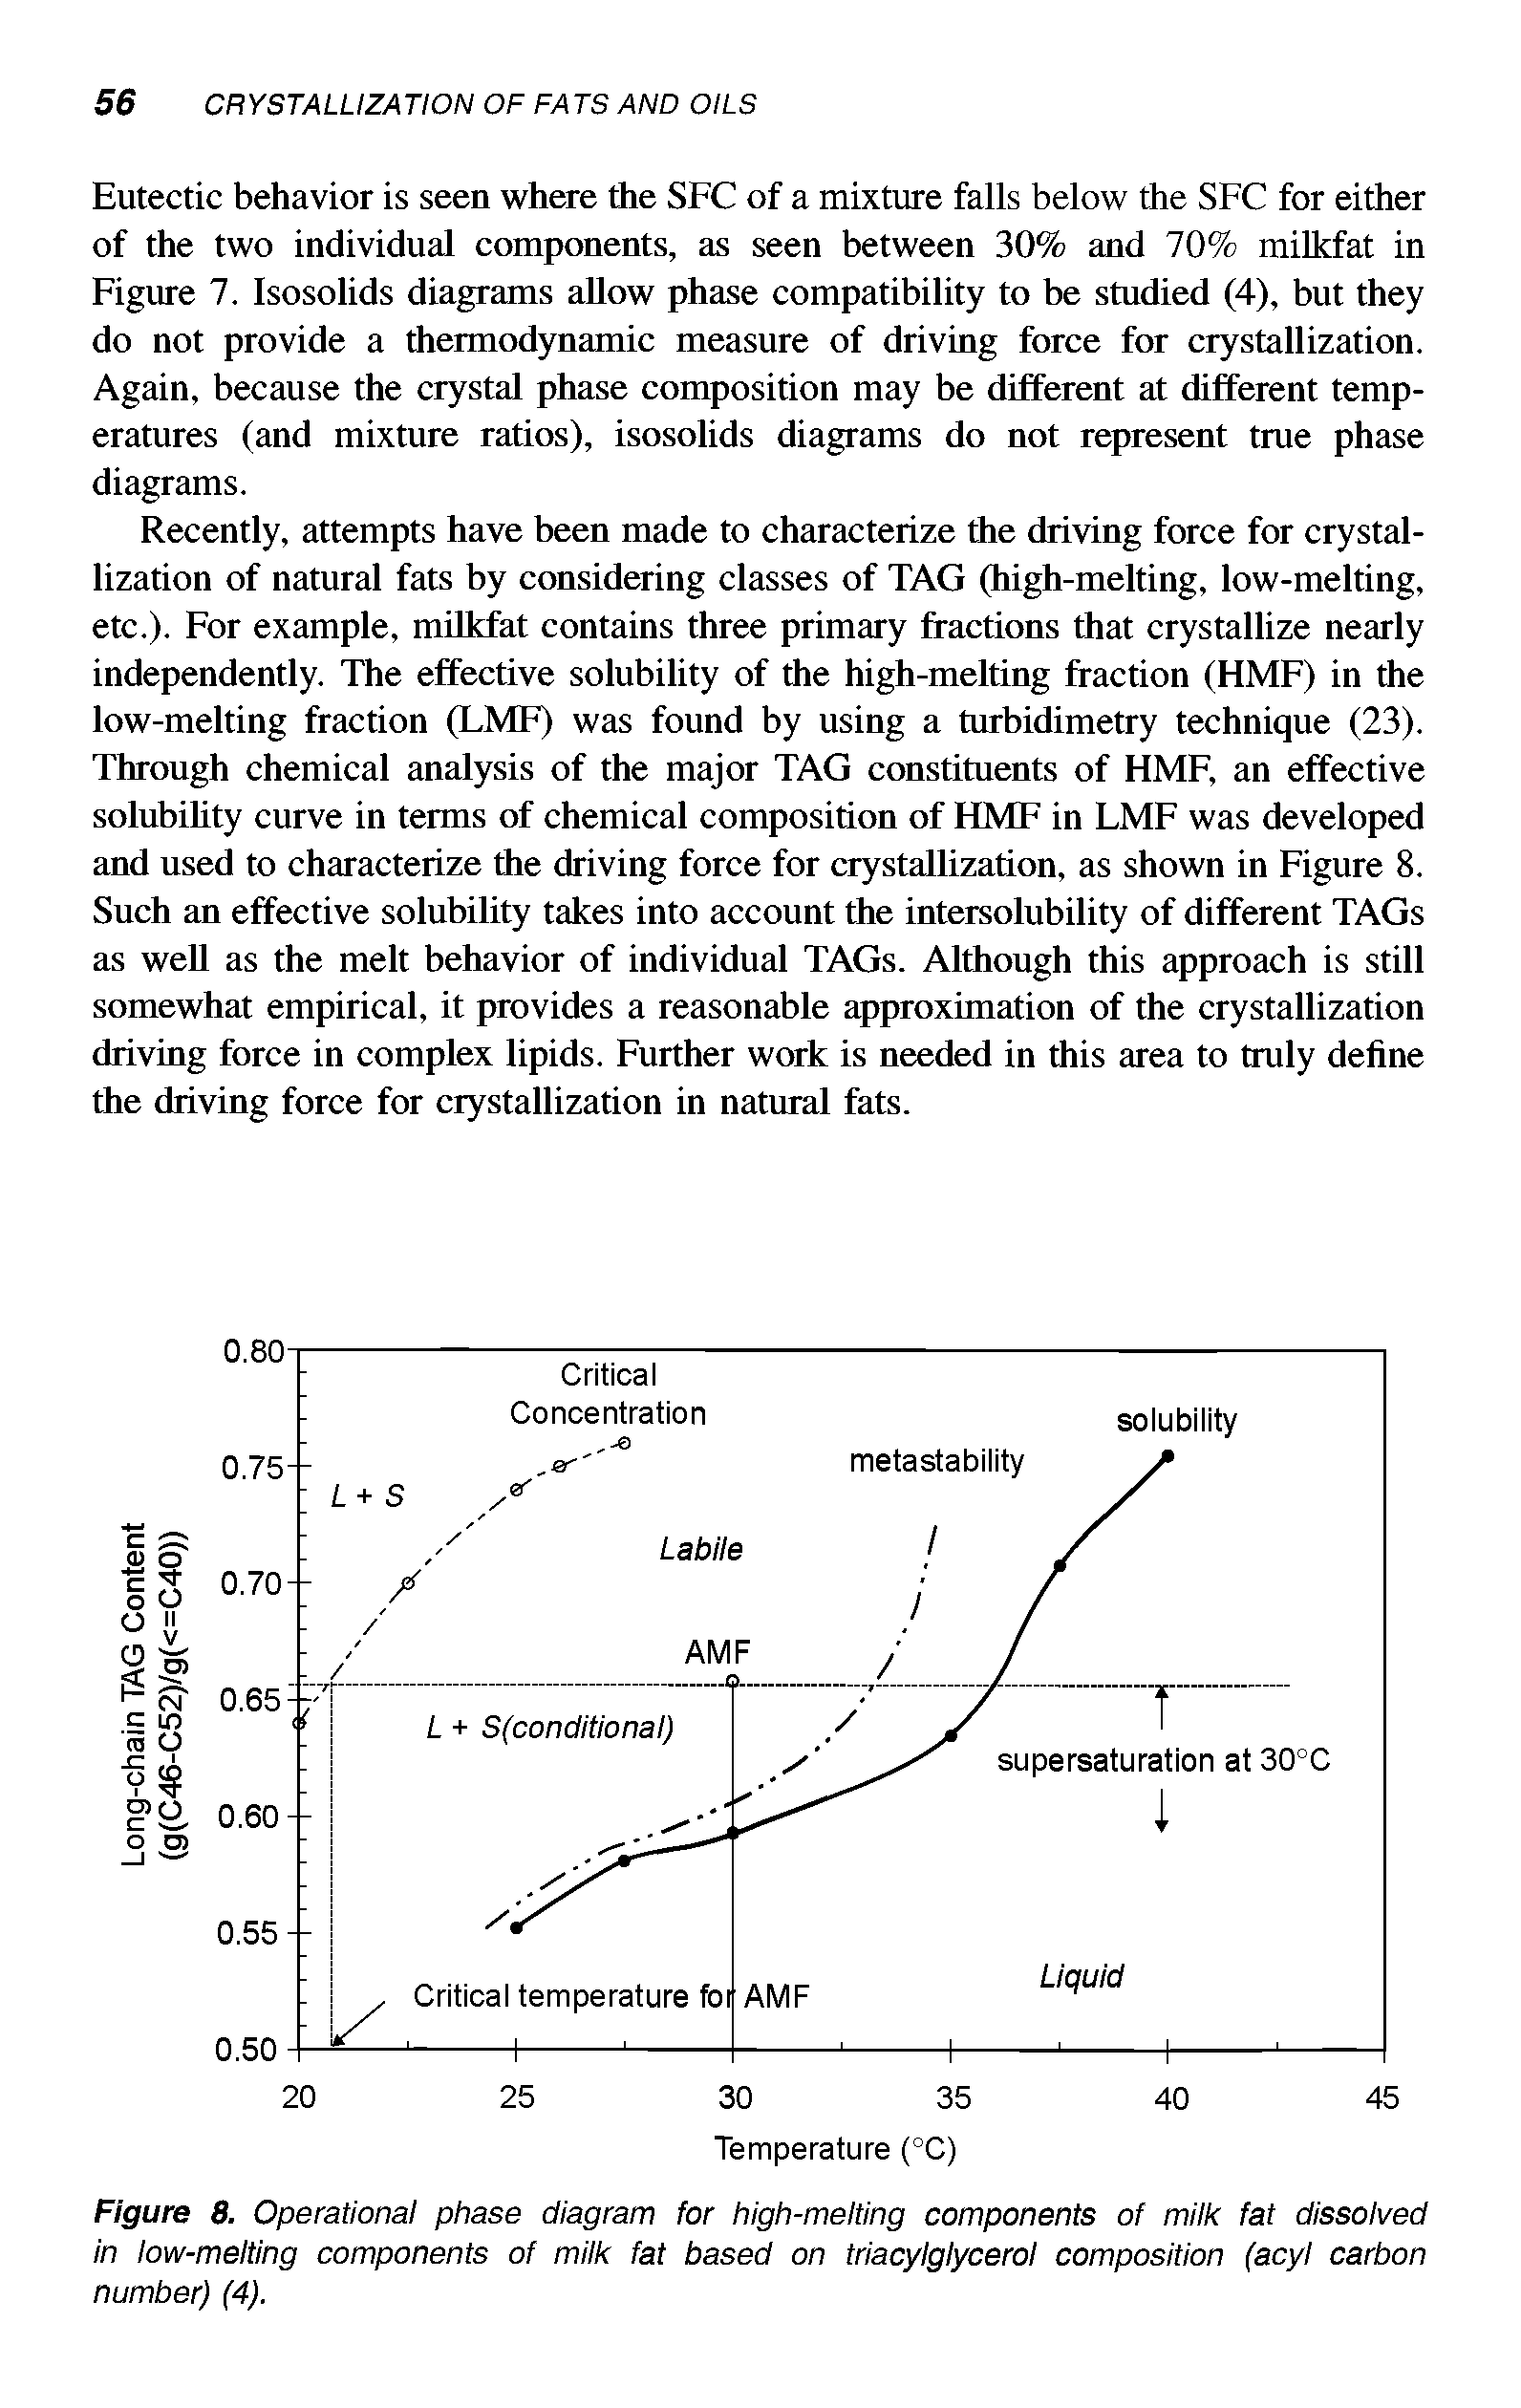 Figure 8. Operational phase diagram for high-melting components of milk fat dissolved in low-melting components of milk fat based on triacylglycerol composition (acyl carbon number) (4).